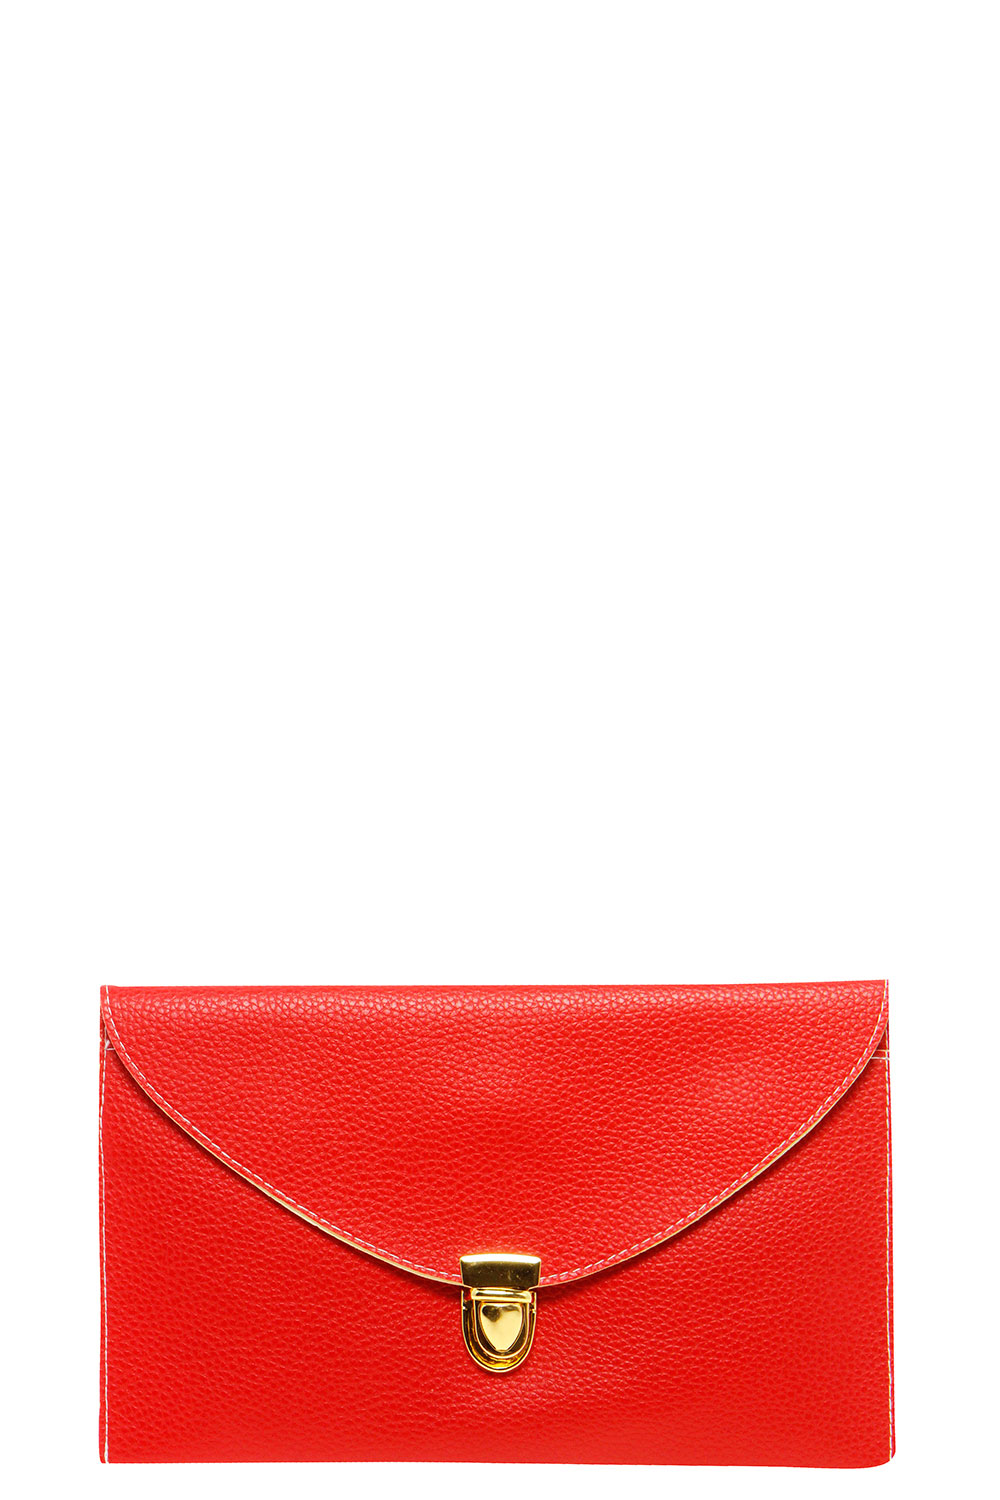 boohoo Lily Clasp Fasten Clutch Bag - red, red